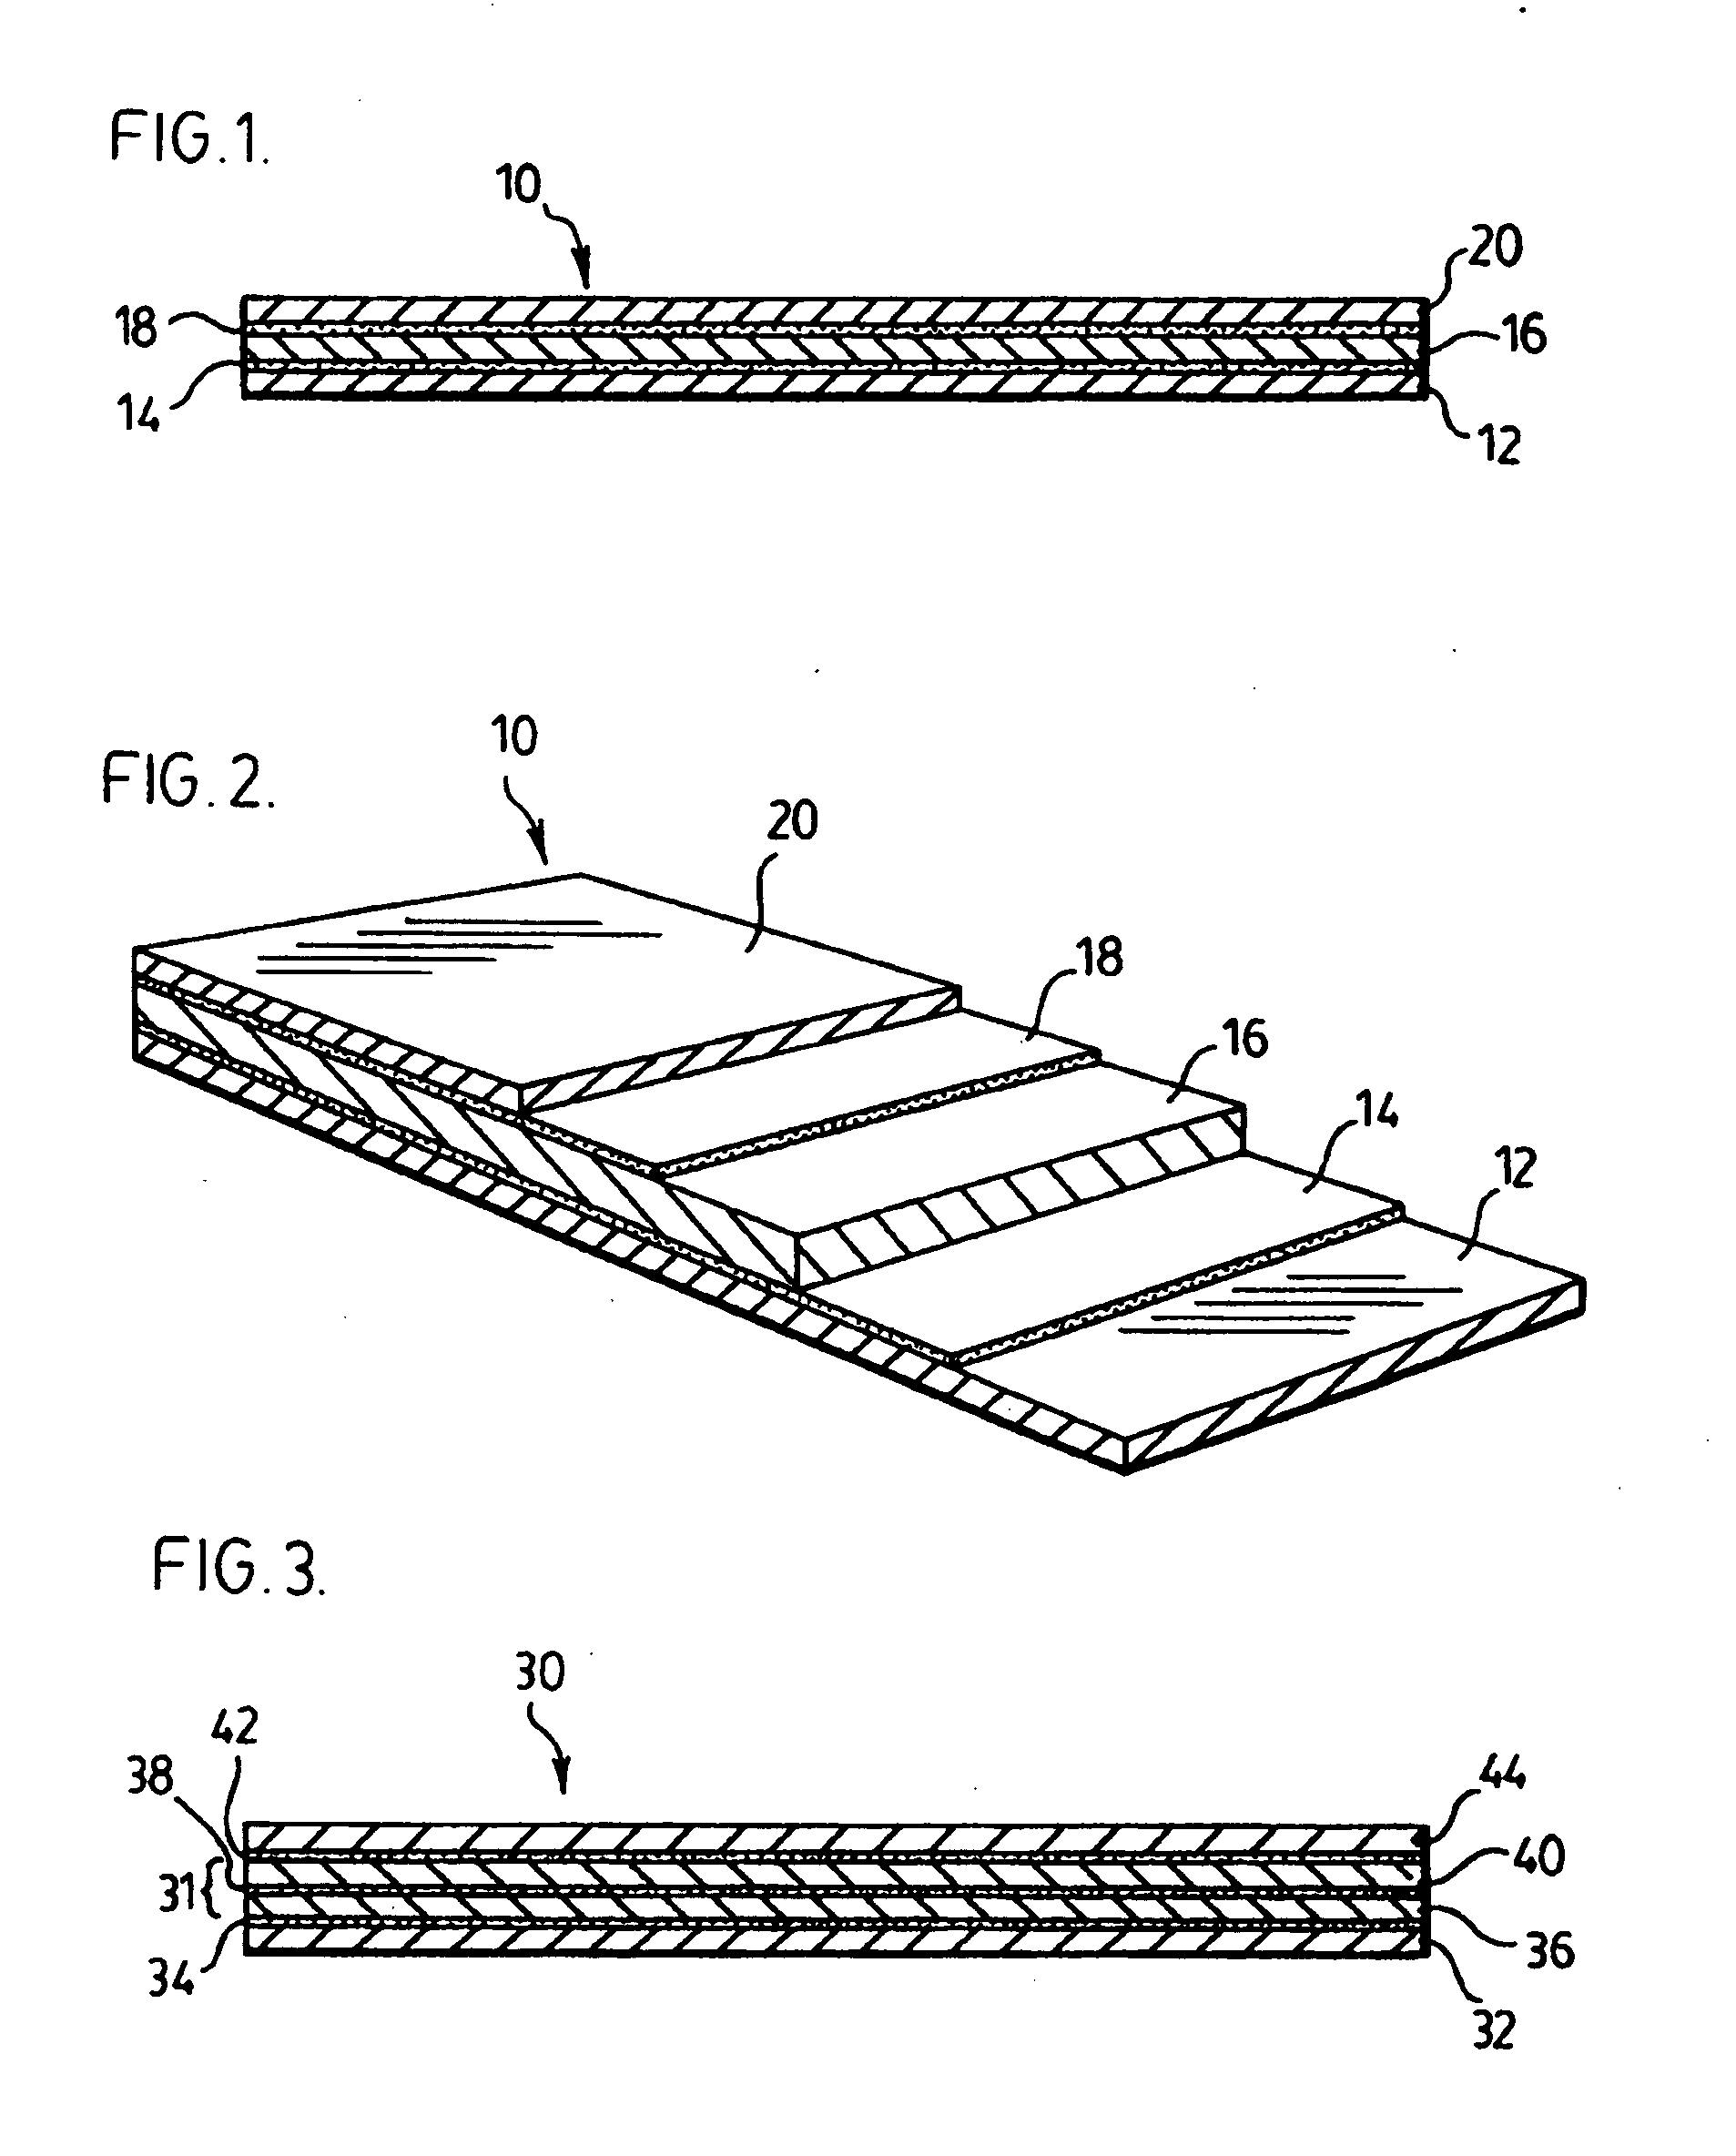 Laminate panel and process for production thereof